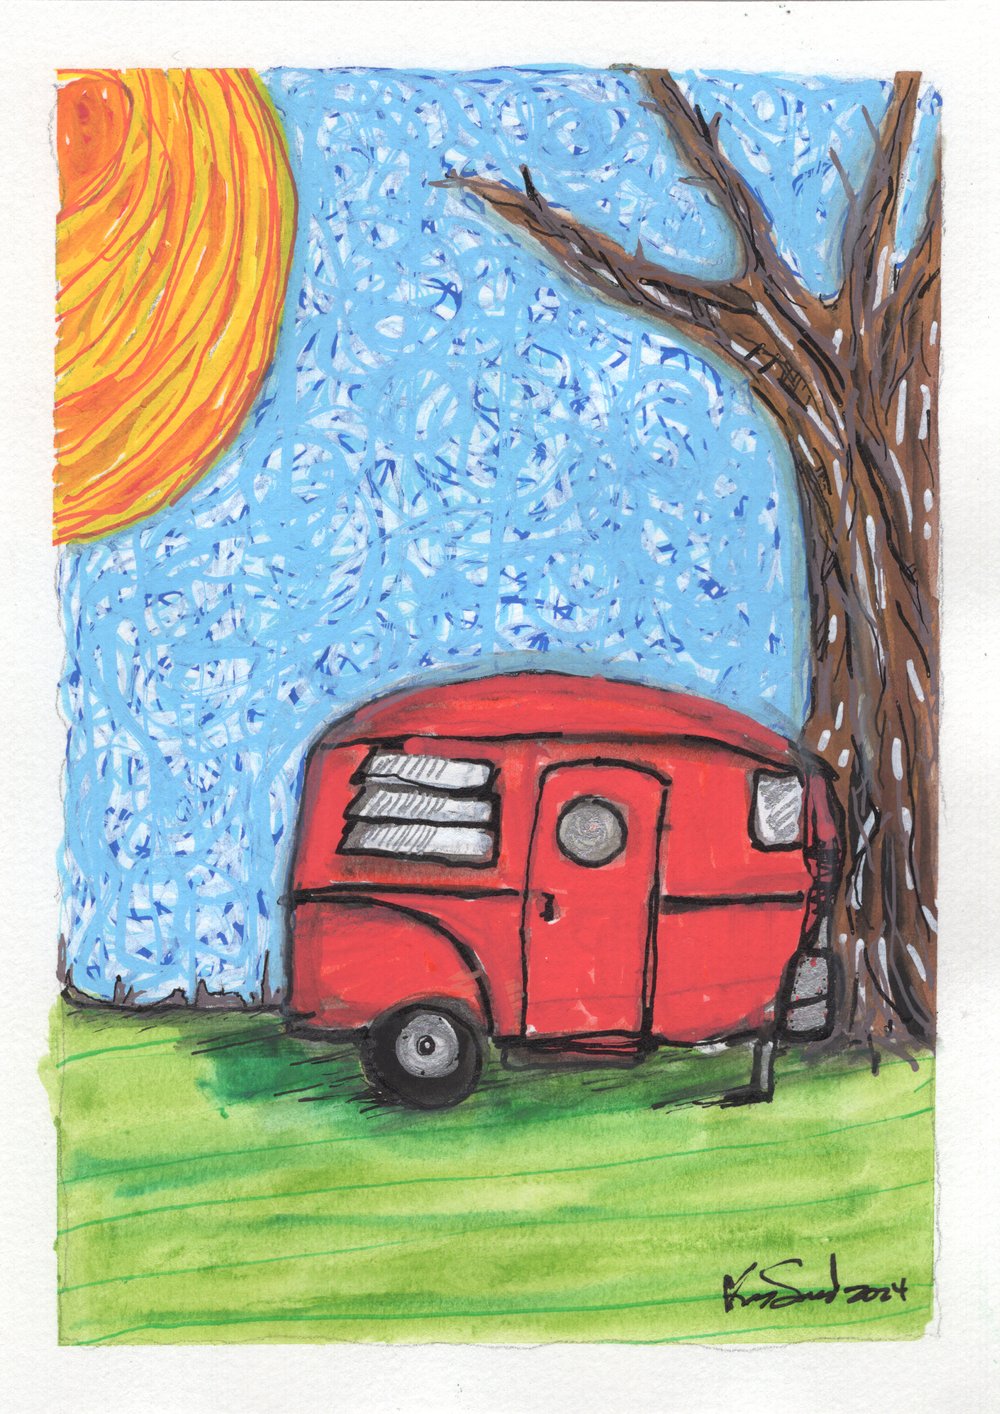 KS ORIGINAL 5x7 acrylic/paint pen on paper, 'We Took The Car To Town'